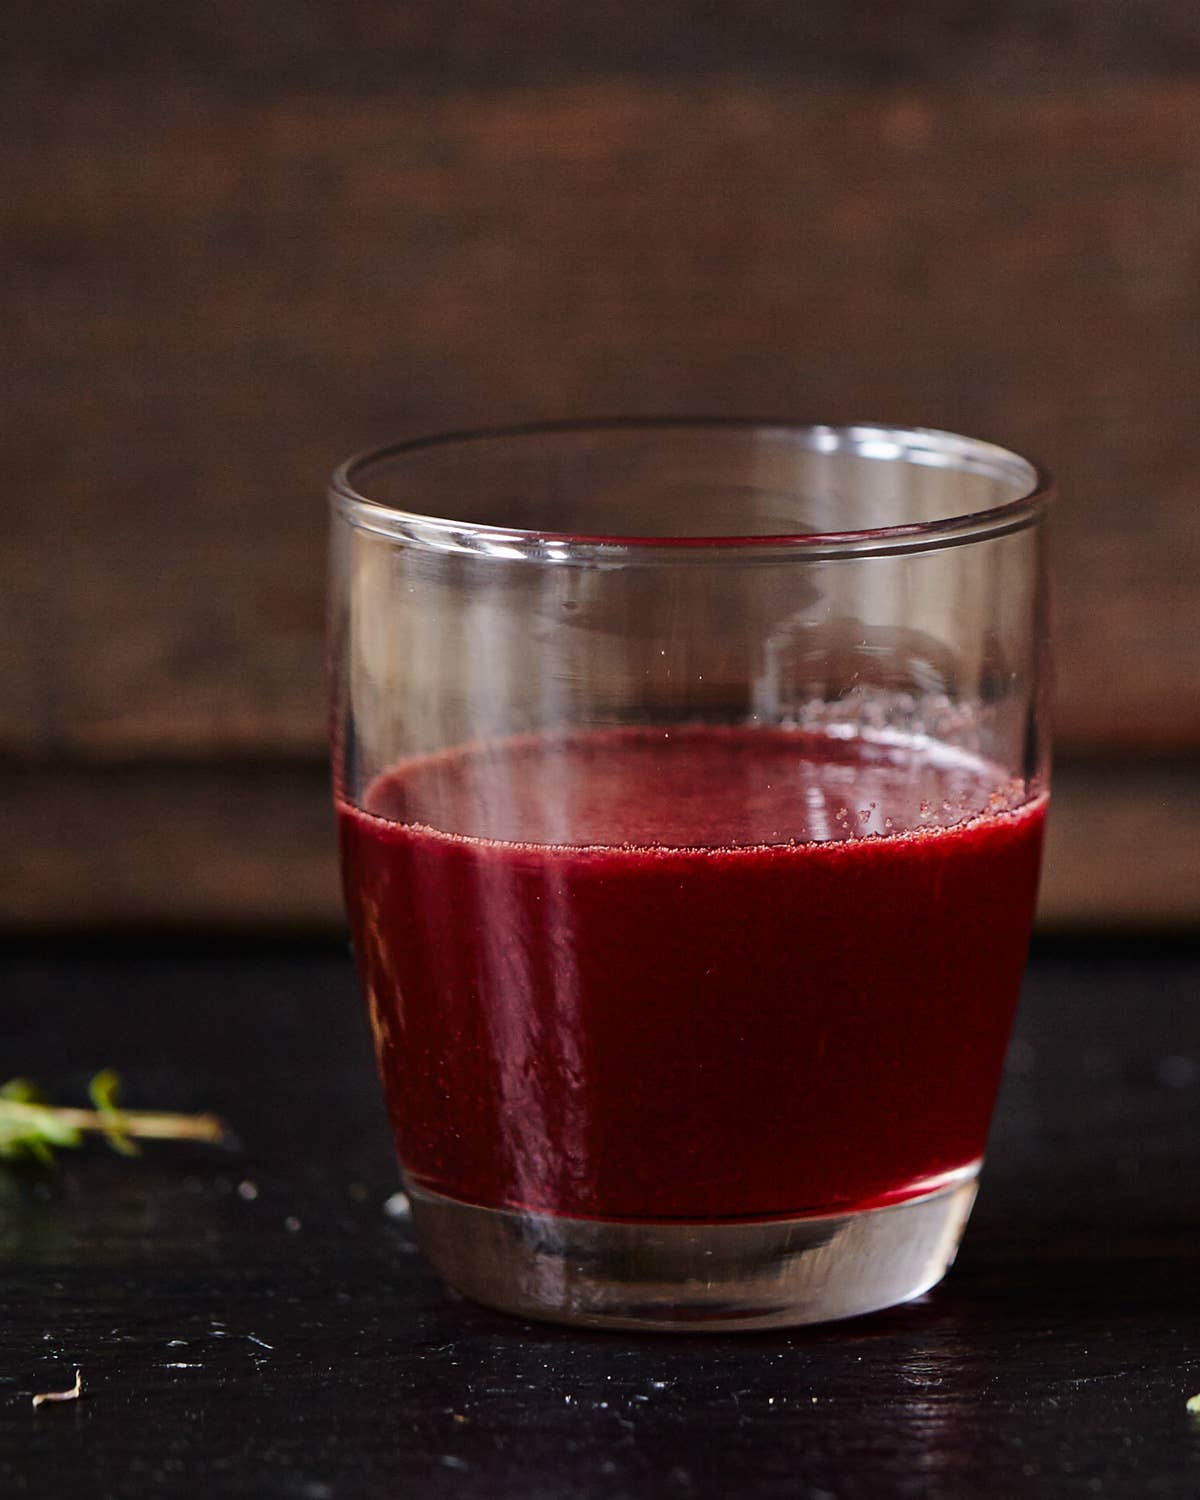 Thyme To Beet It with Beet Syrup